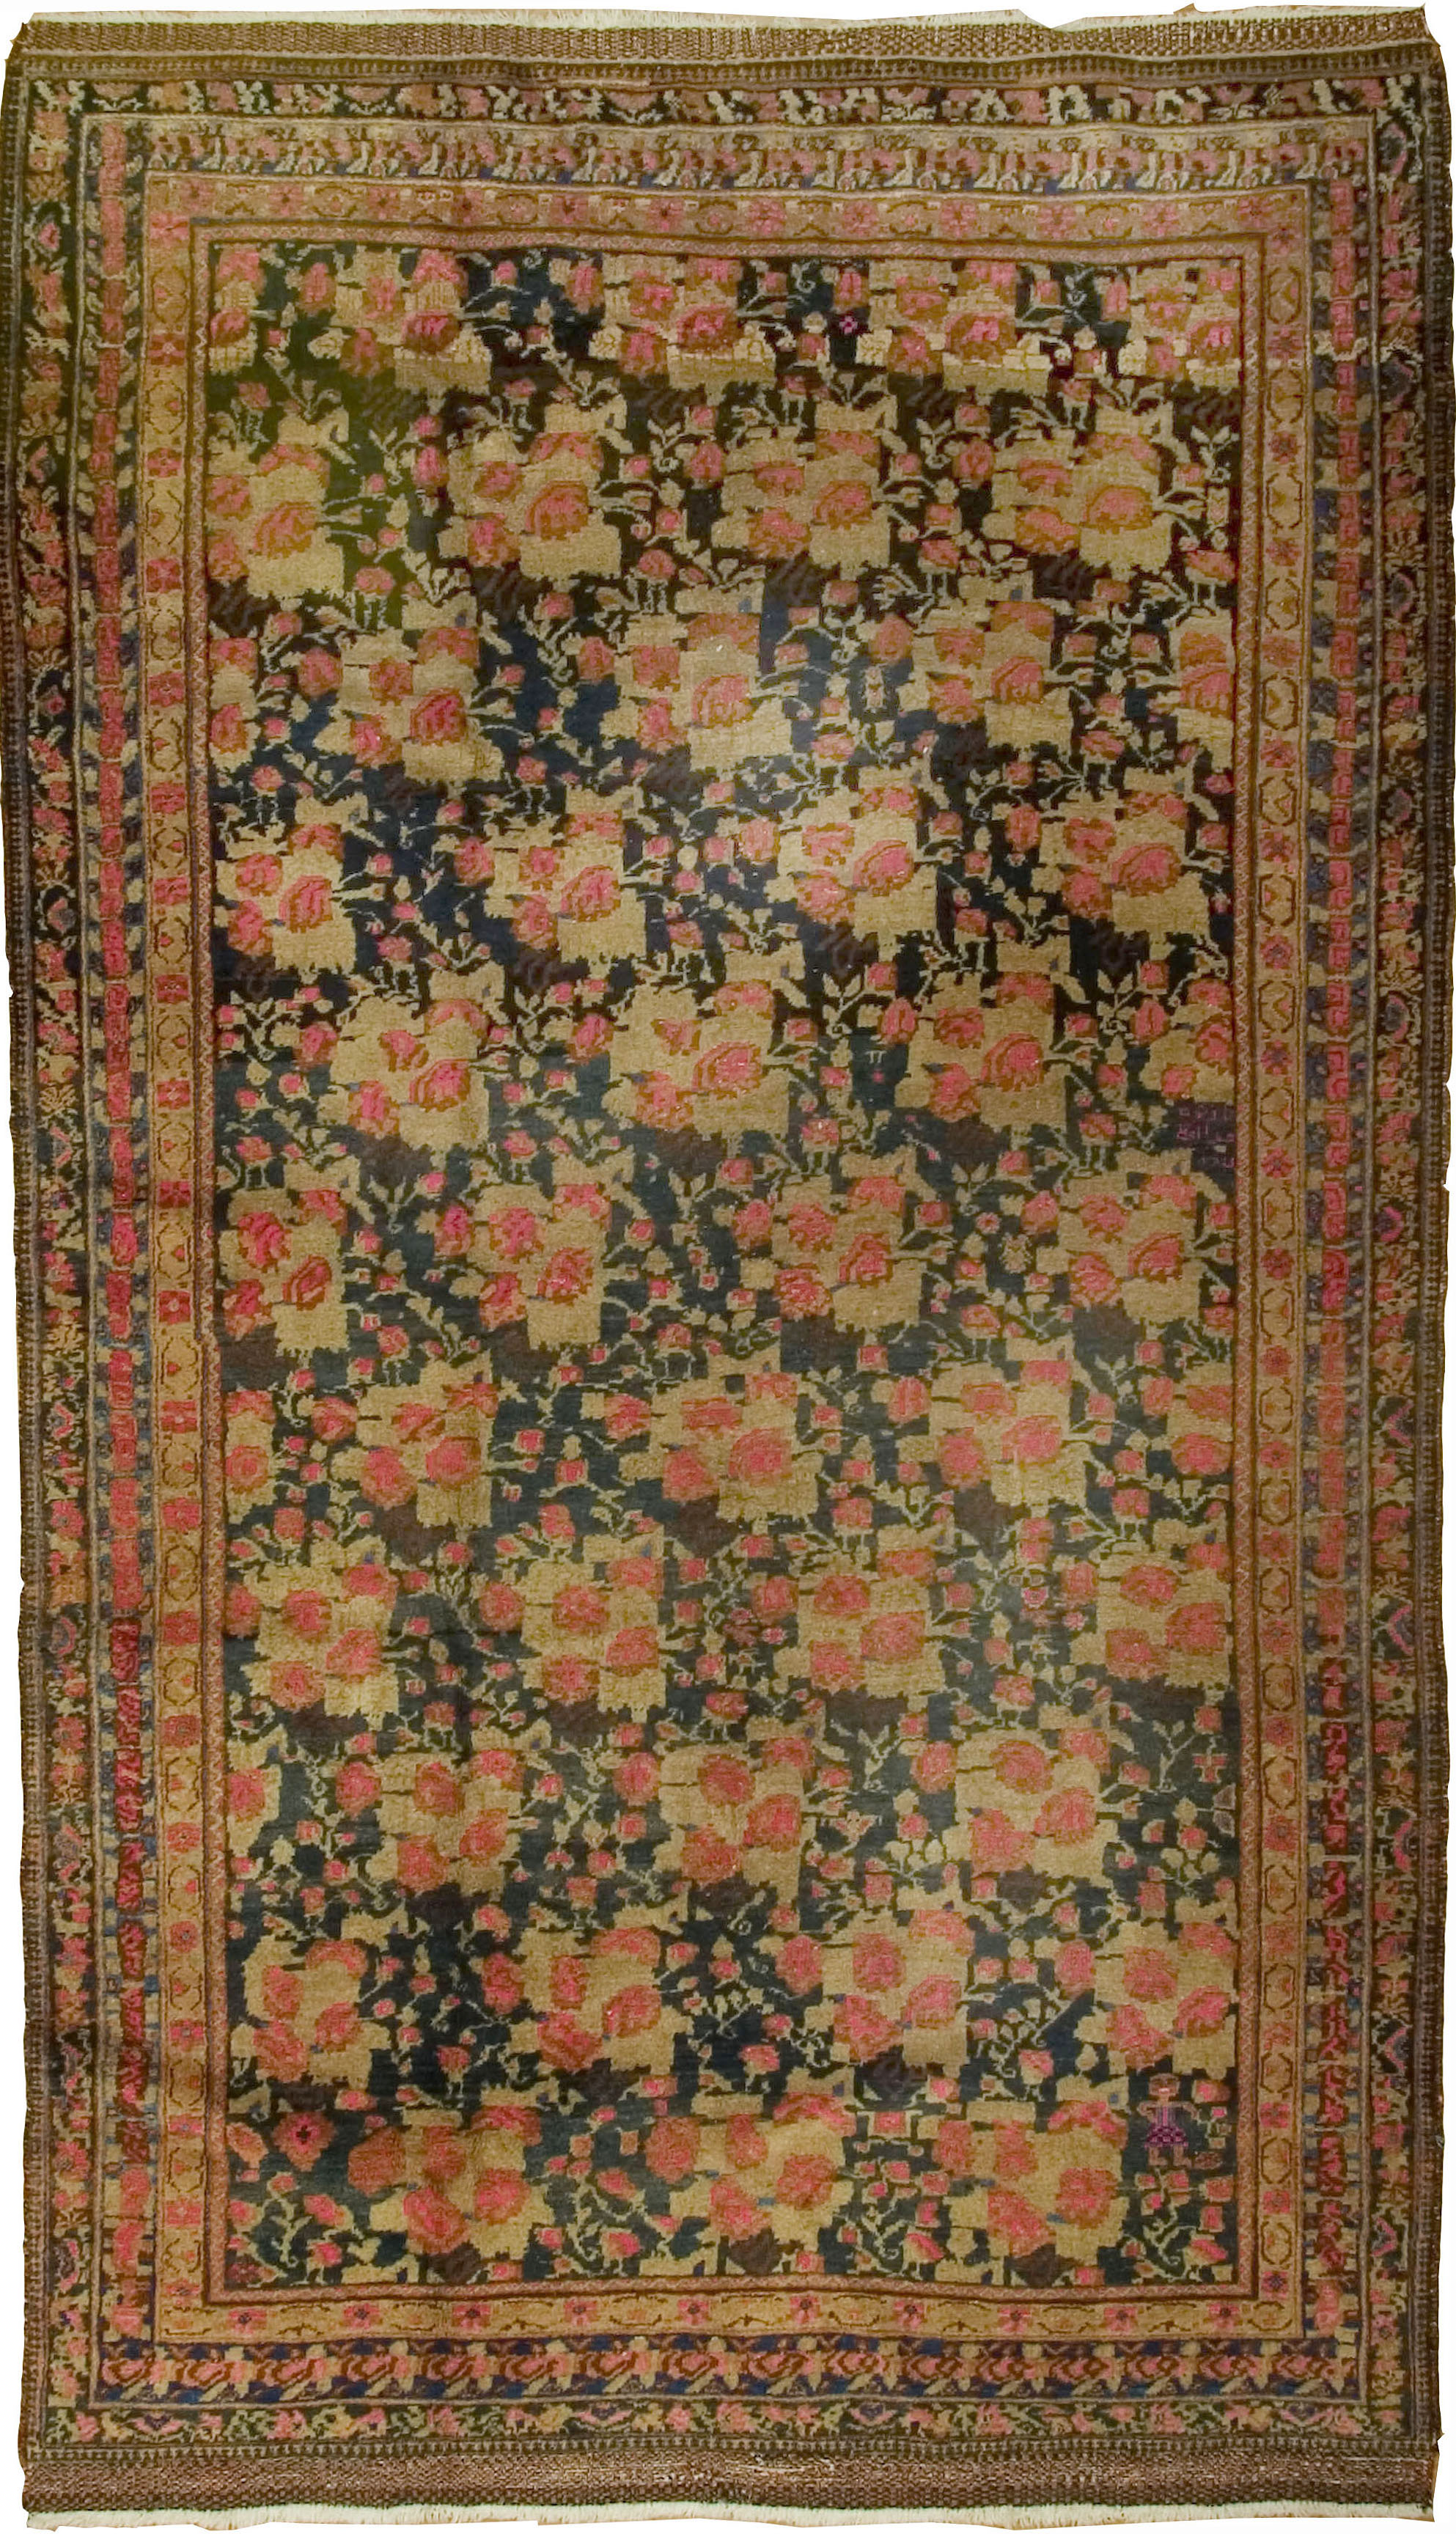 Antique Afshar Tribal Rugs